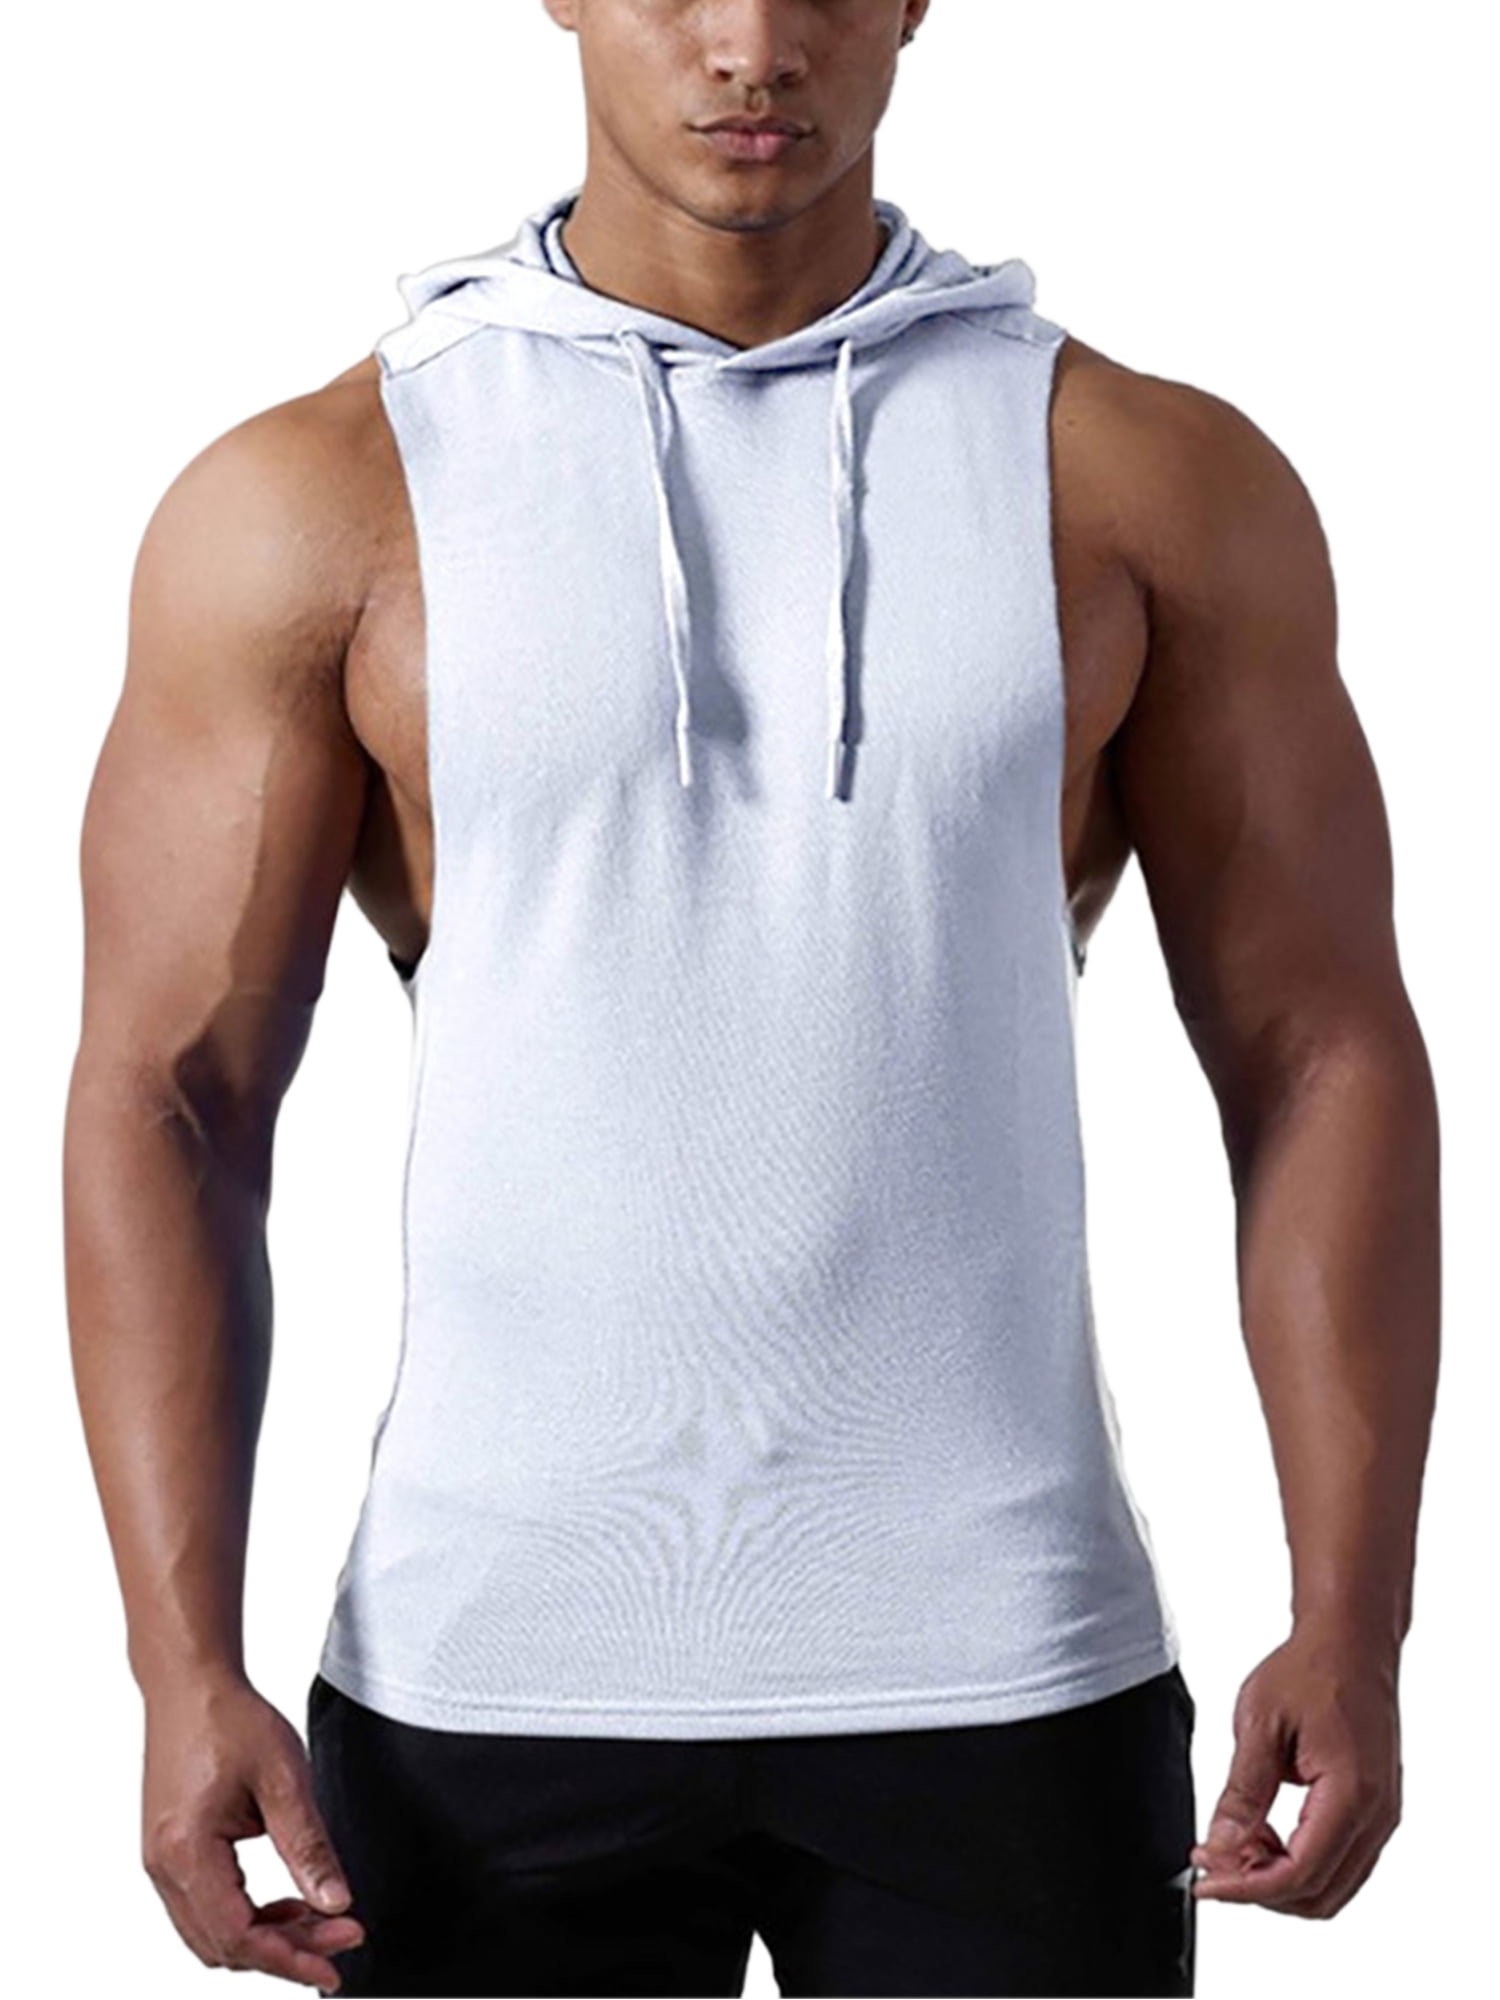 Shirts for Men Fashion Sleeveless Drawstring Hooded Shirt Summer Casual Loose Muscle Fit Workout Pullover T Shirt